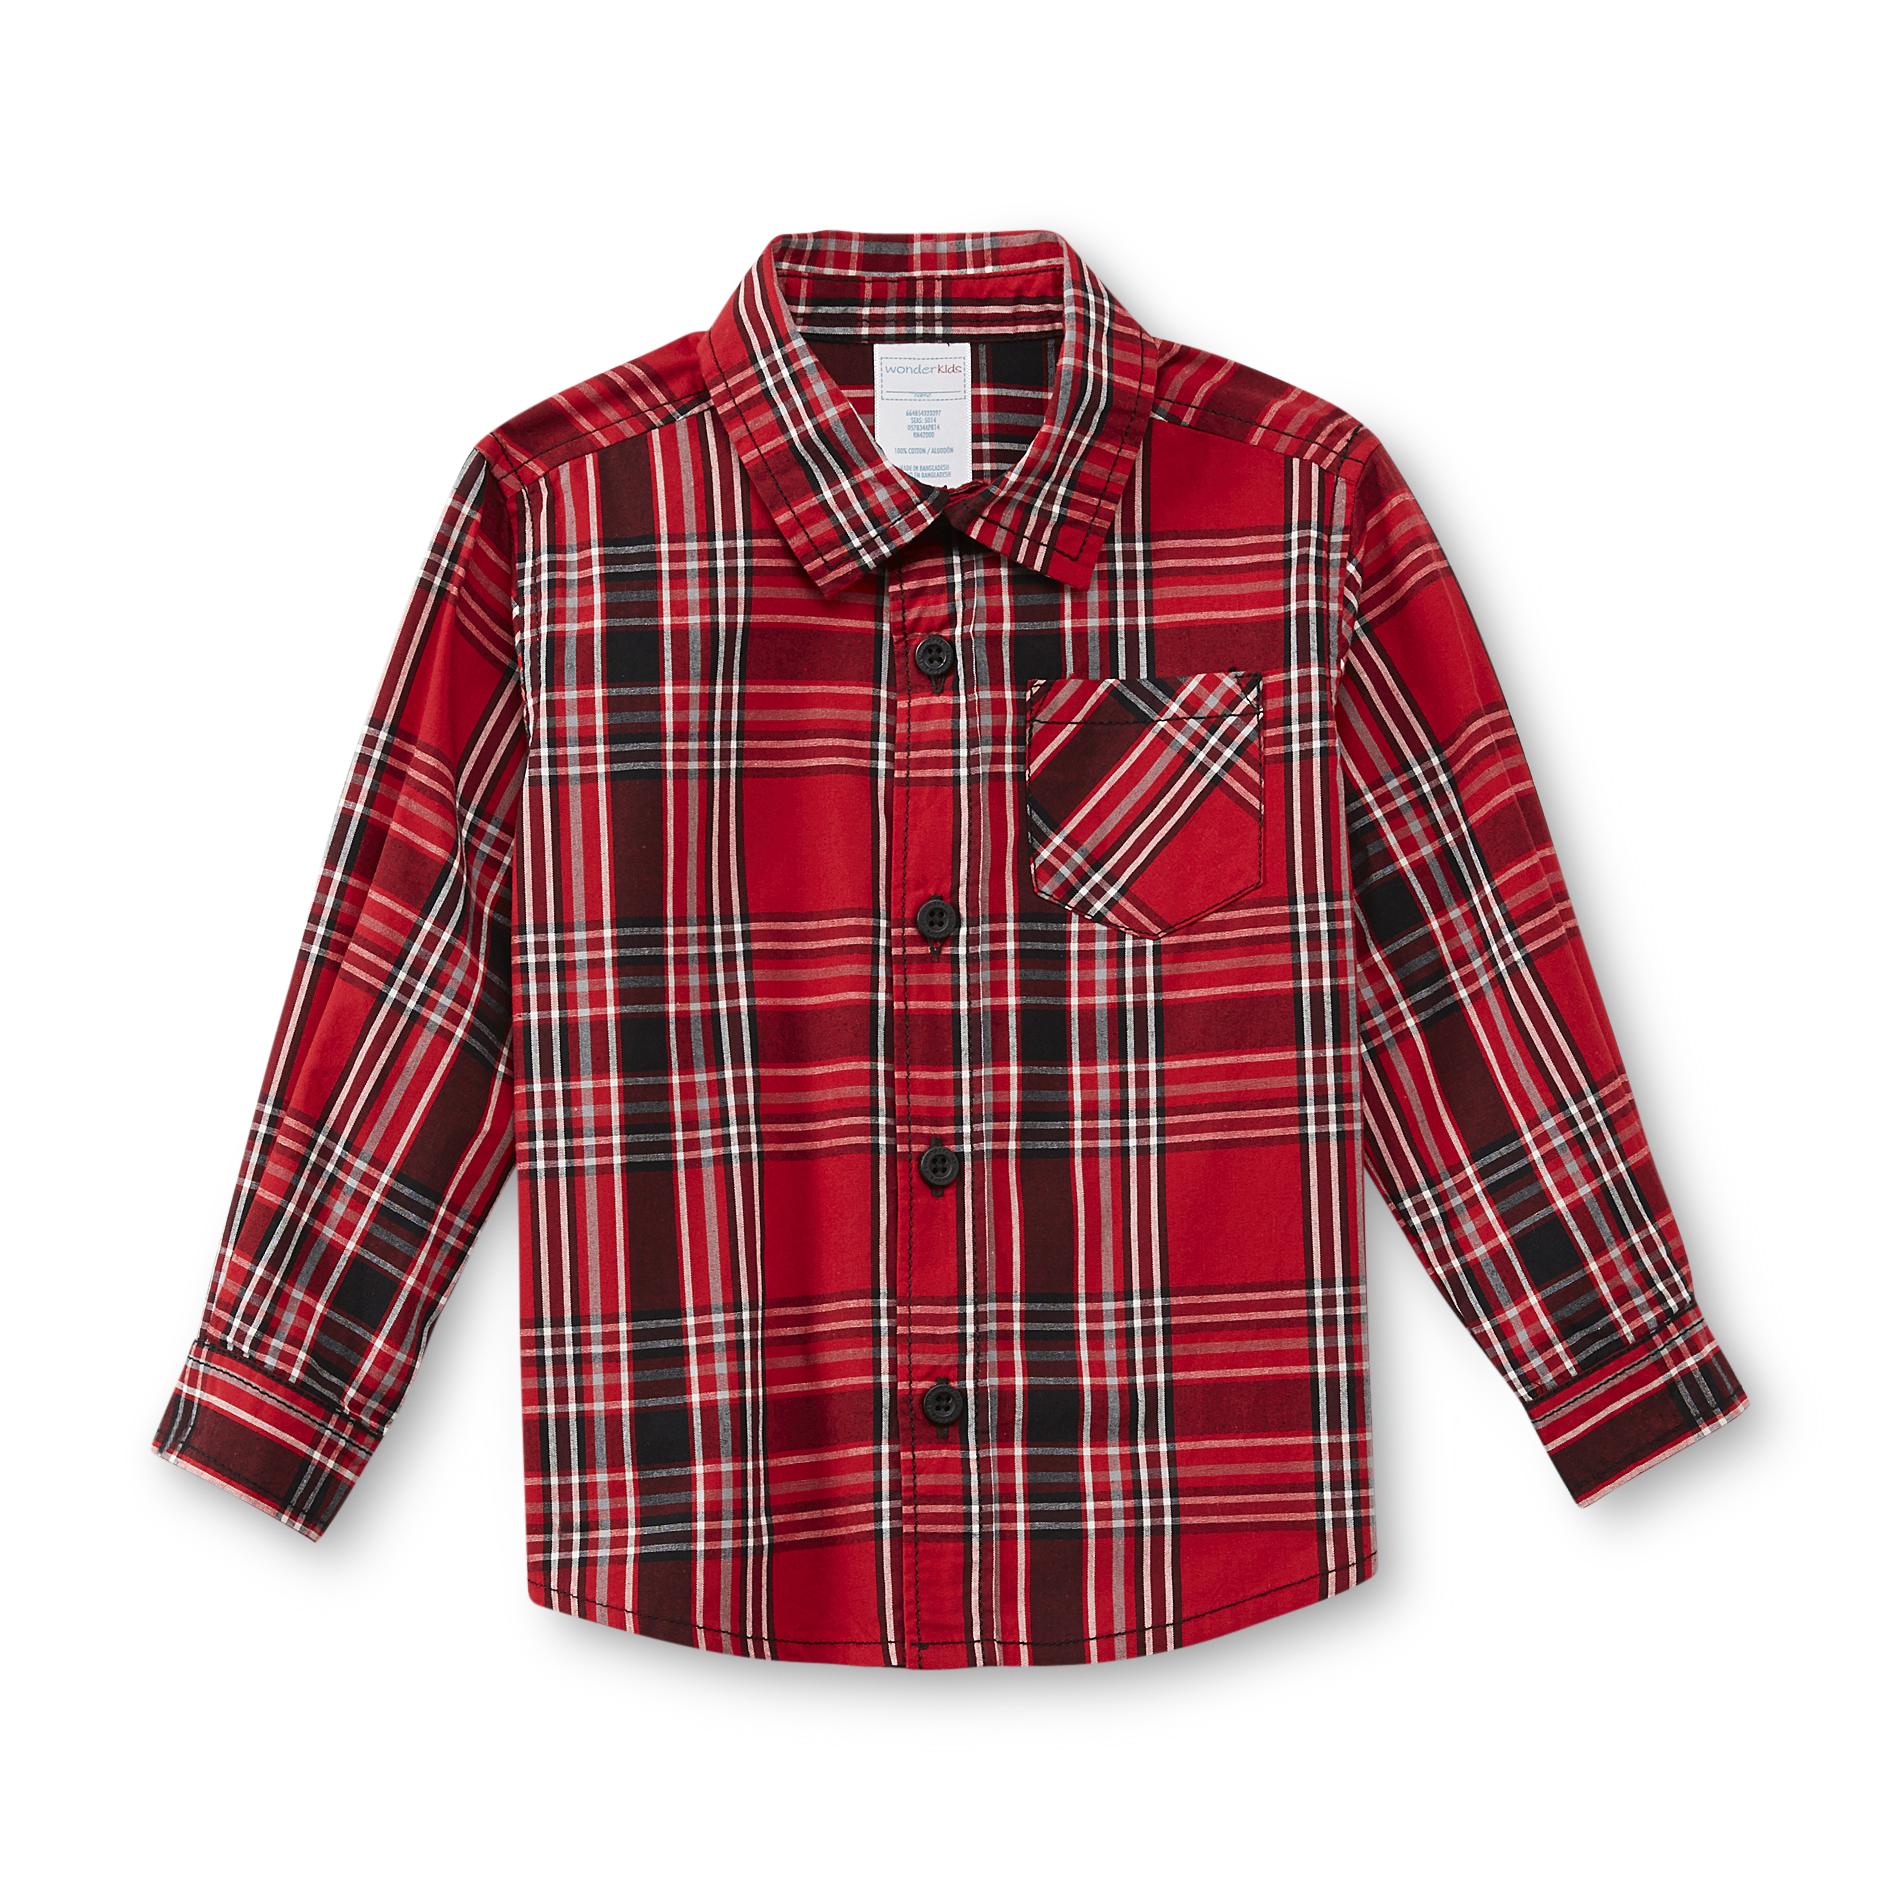 Holiday Editions Infant & Toddler Boy's Button-Front Shirt - Plaid